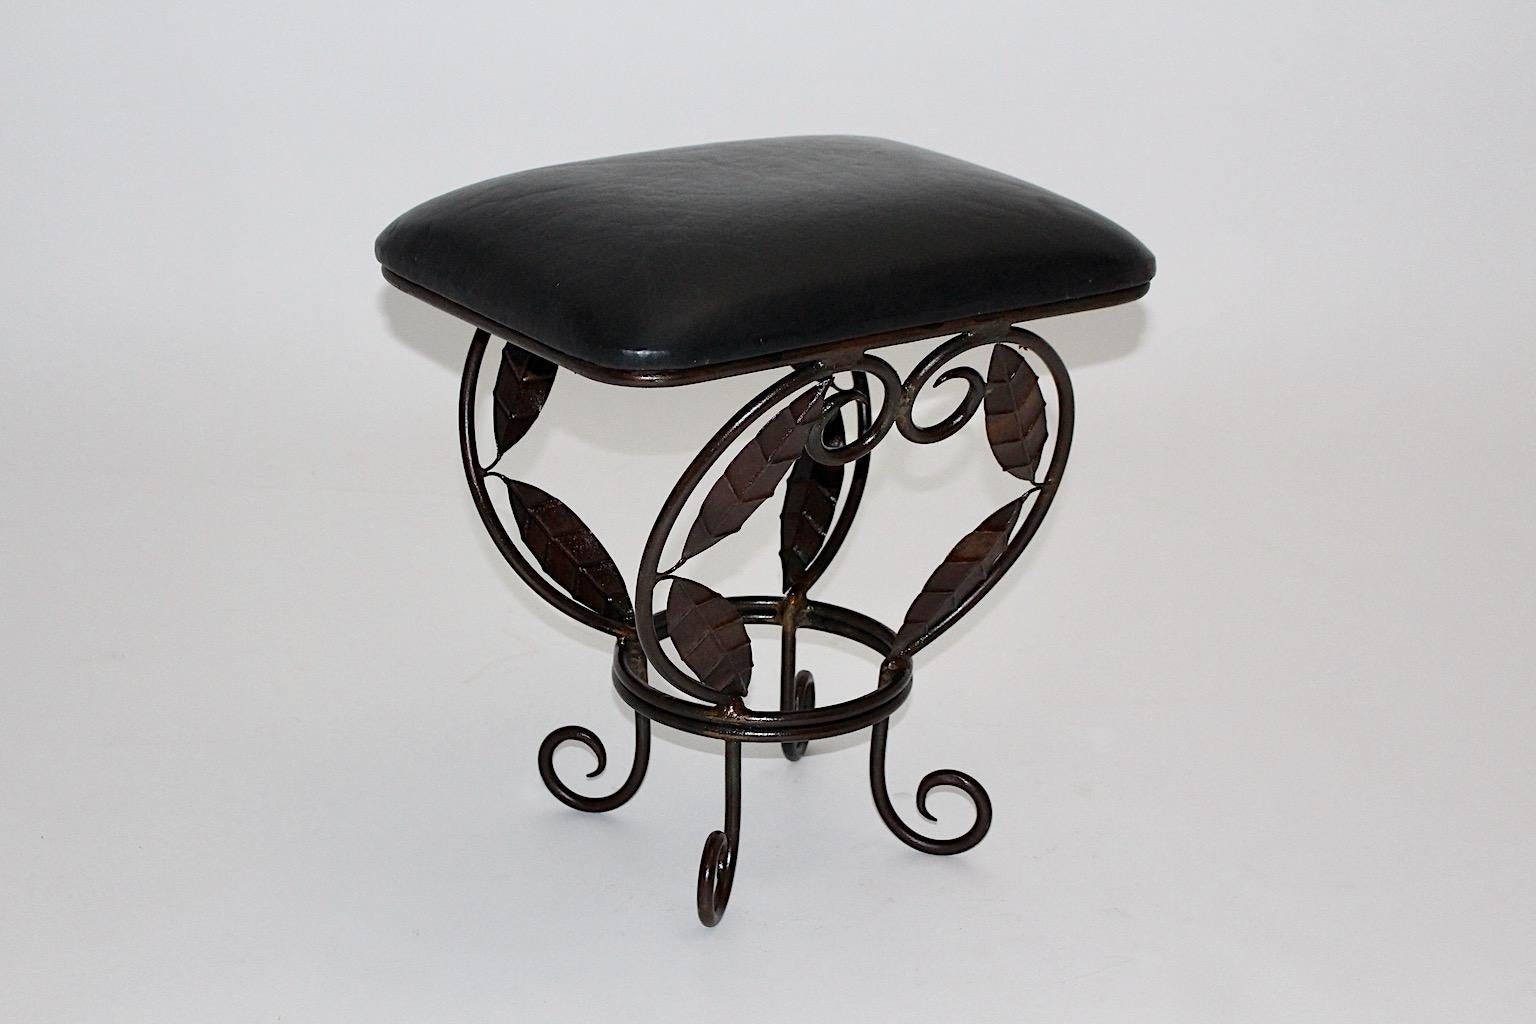 Hollywood Regency Vintage Brown Metal Stool Ottoman with Leaves Black Leather Seat, 1970s, France For Sale